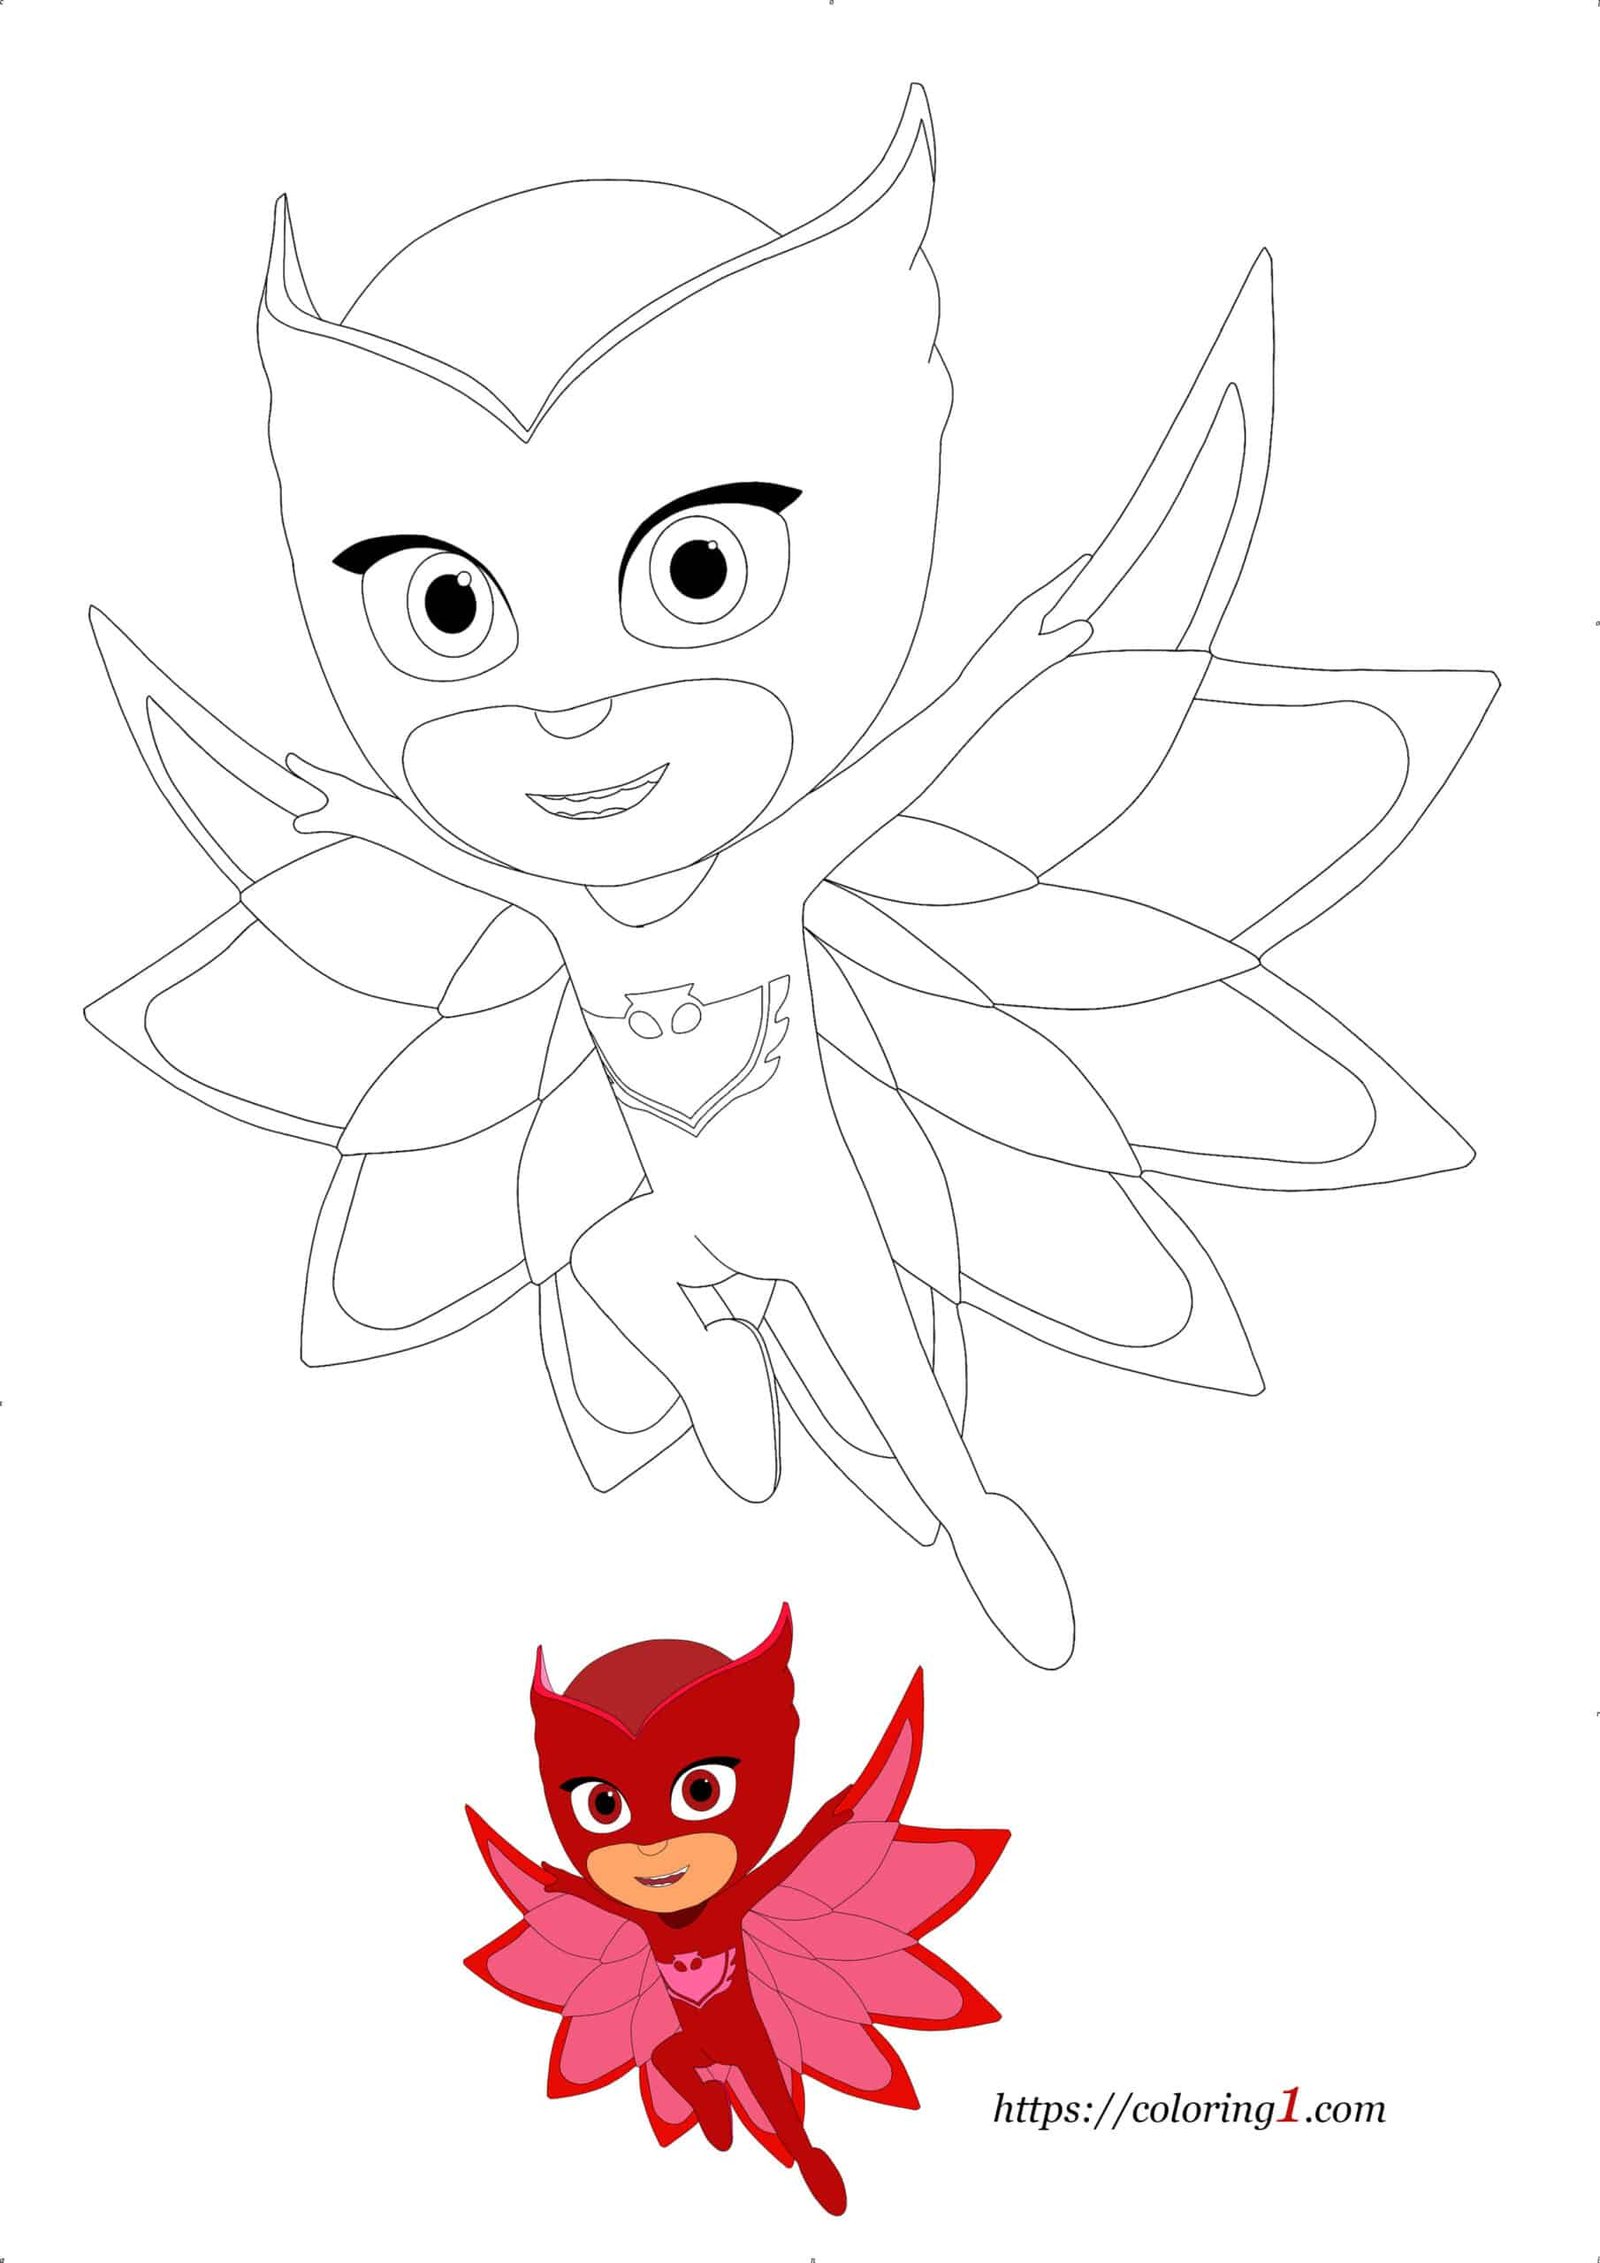 Pj Masks Owlette coloring sheet for boys and girls